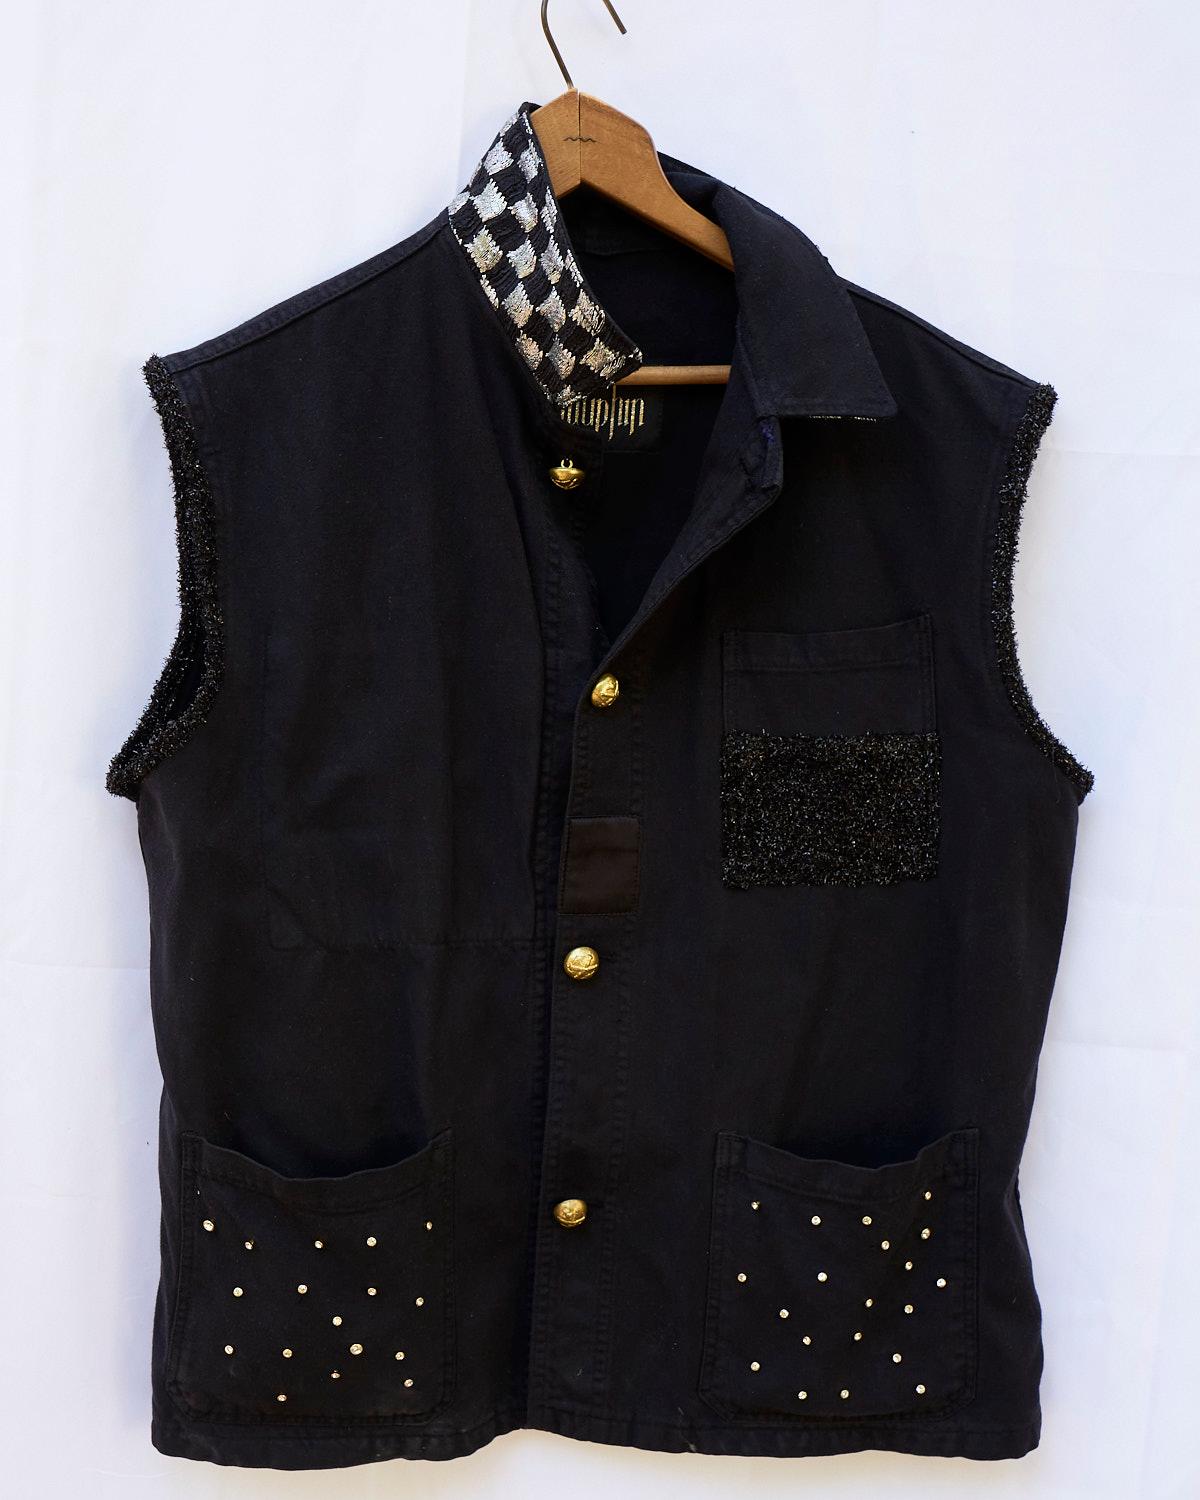 Sleeveless Jacket Vest Cotton Black Embellished Crystal Vintage Military Repurposed into a Vest with Silk and Black Sparkle Fabric Gold Buttons and Vintage Collectible Military Vintage Gold tone Buttons in Brass.

This is a One of a kind